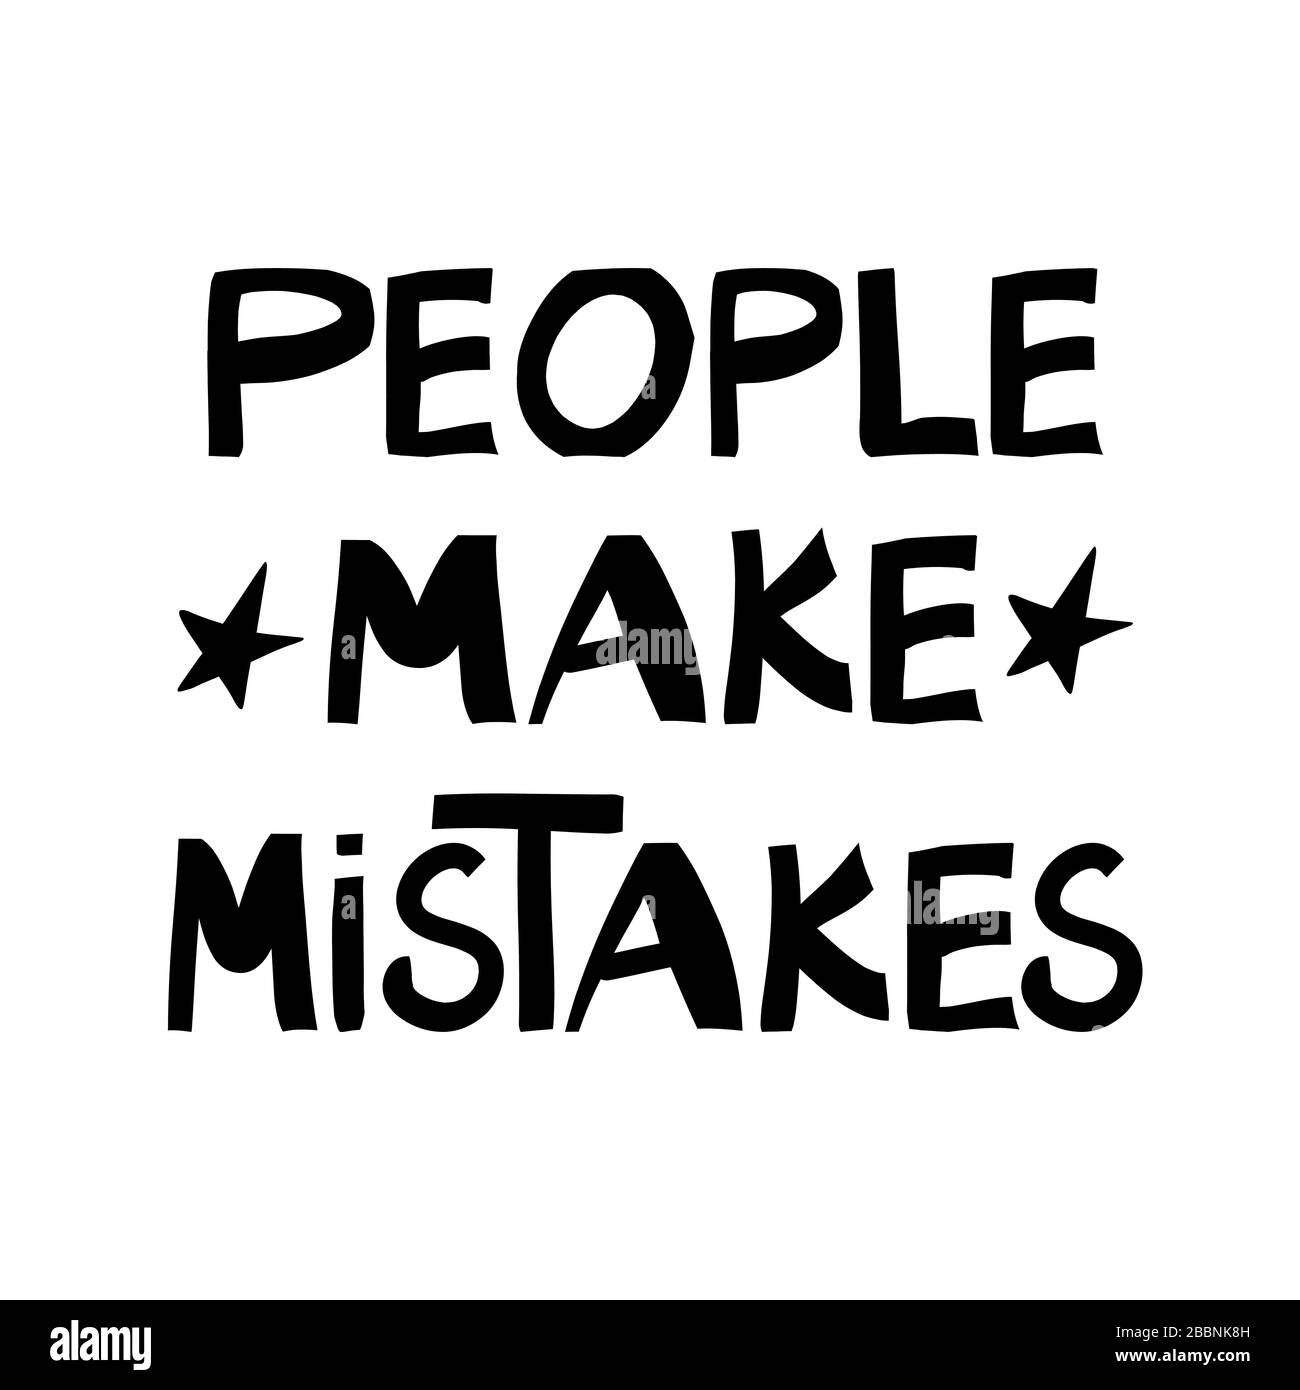 People make mistakes. Philosophical quote. Cute hand drawn lettering in modern scandinavian style. Isolated on white background. Stock illustration. Stock Vector